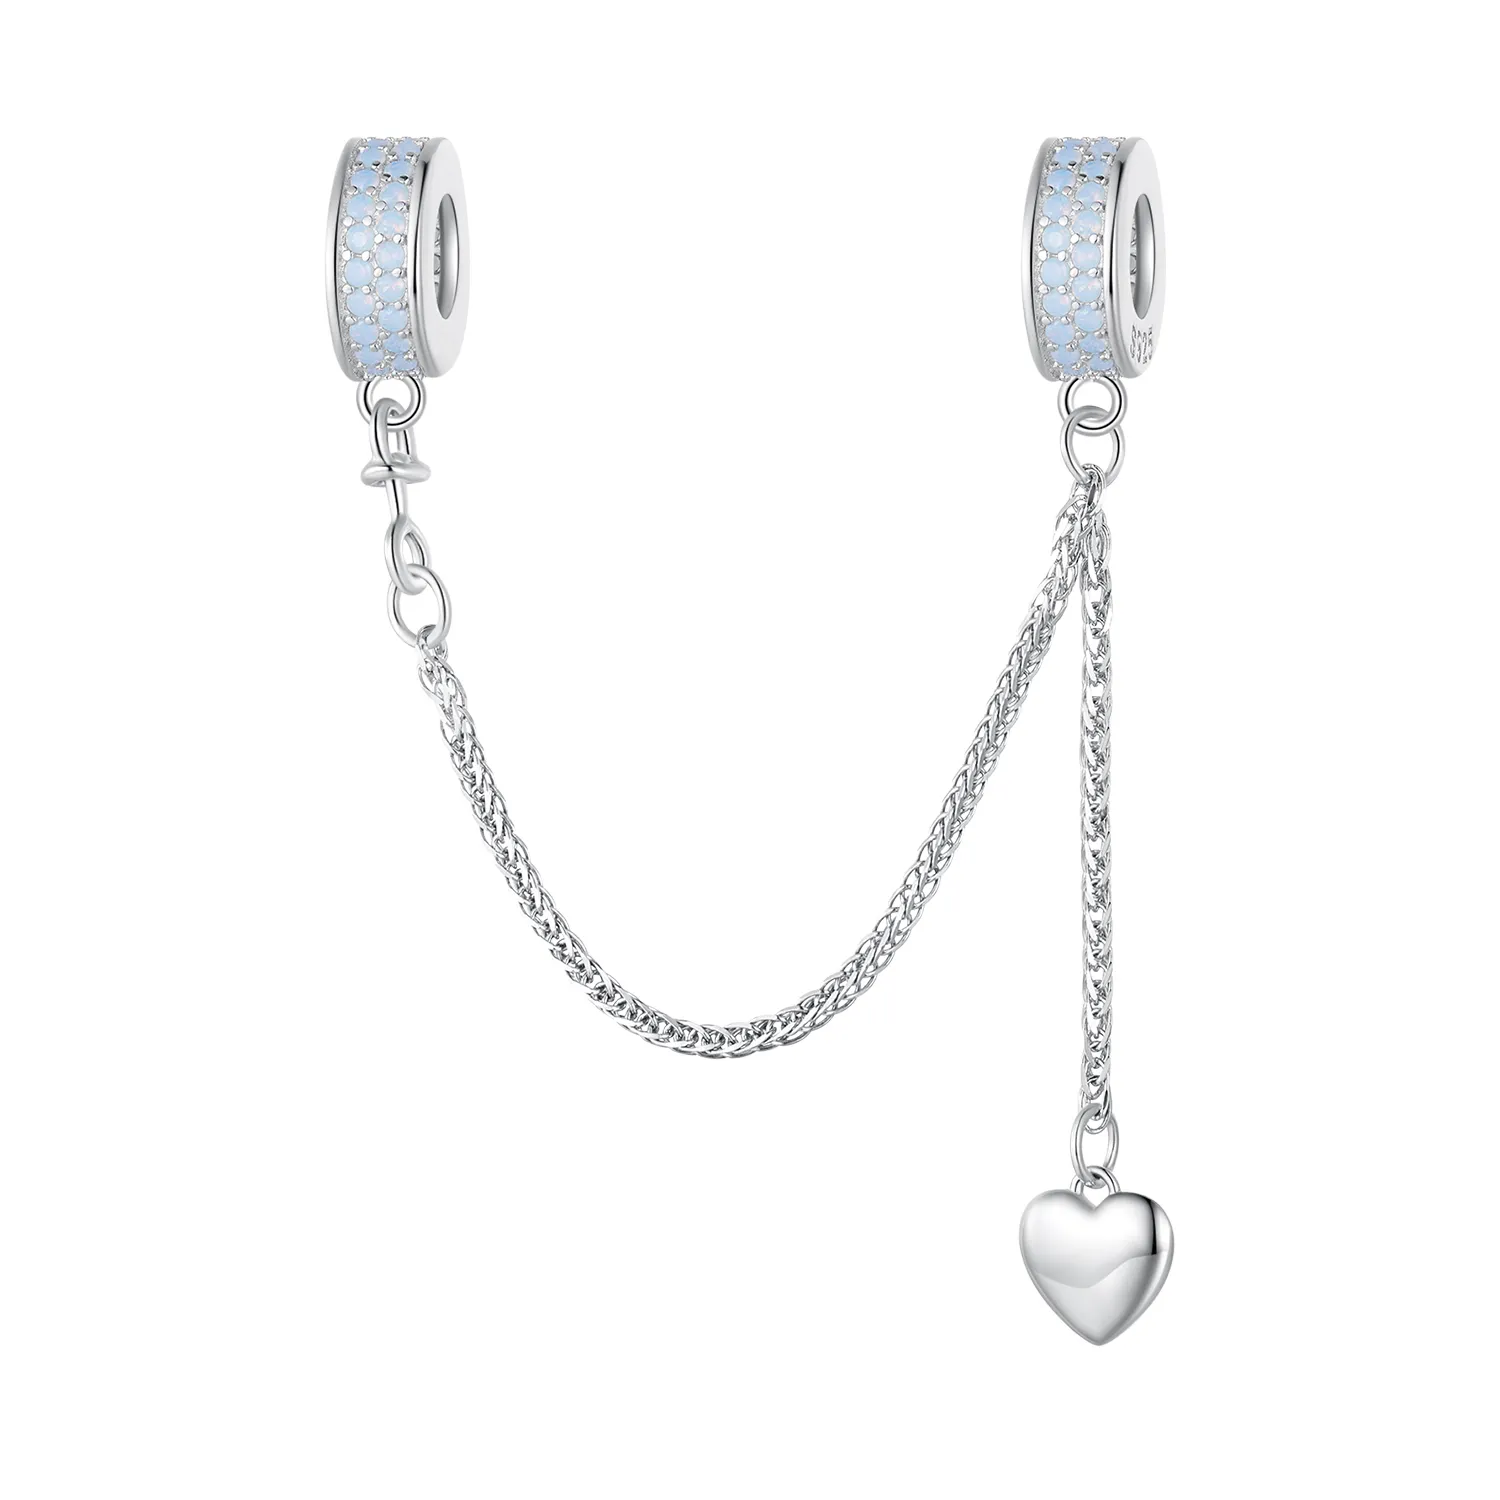 Pandora Style Silver Heart Safety Chain - BSC795